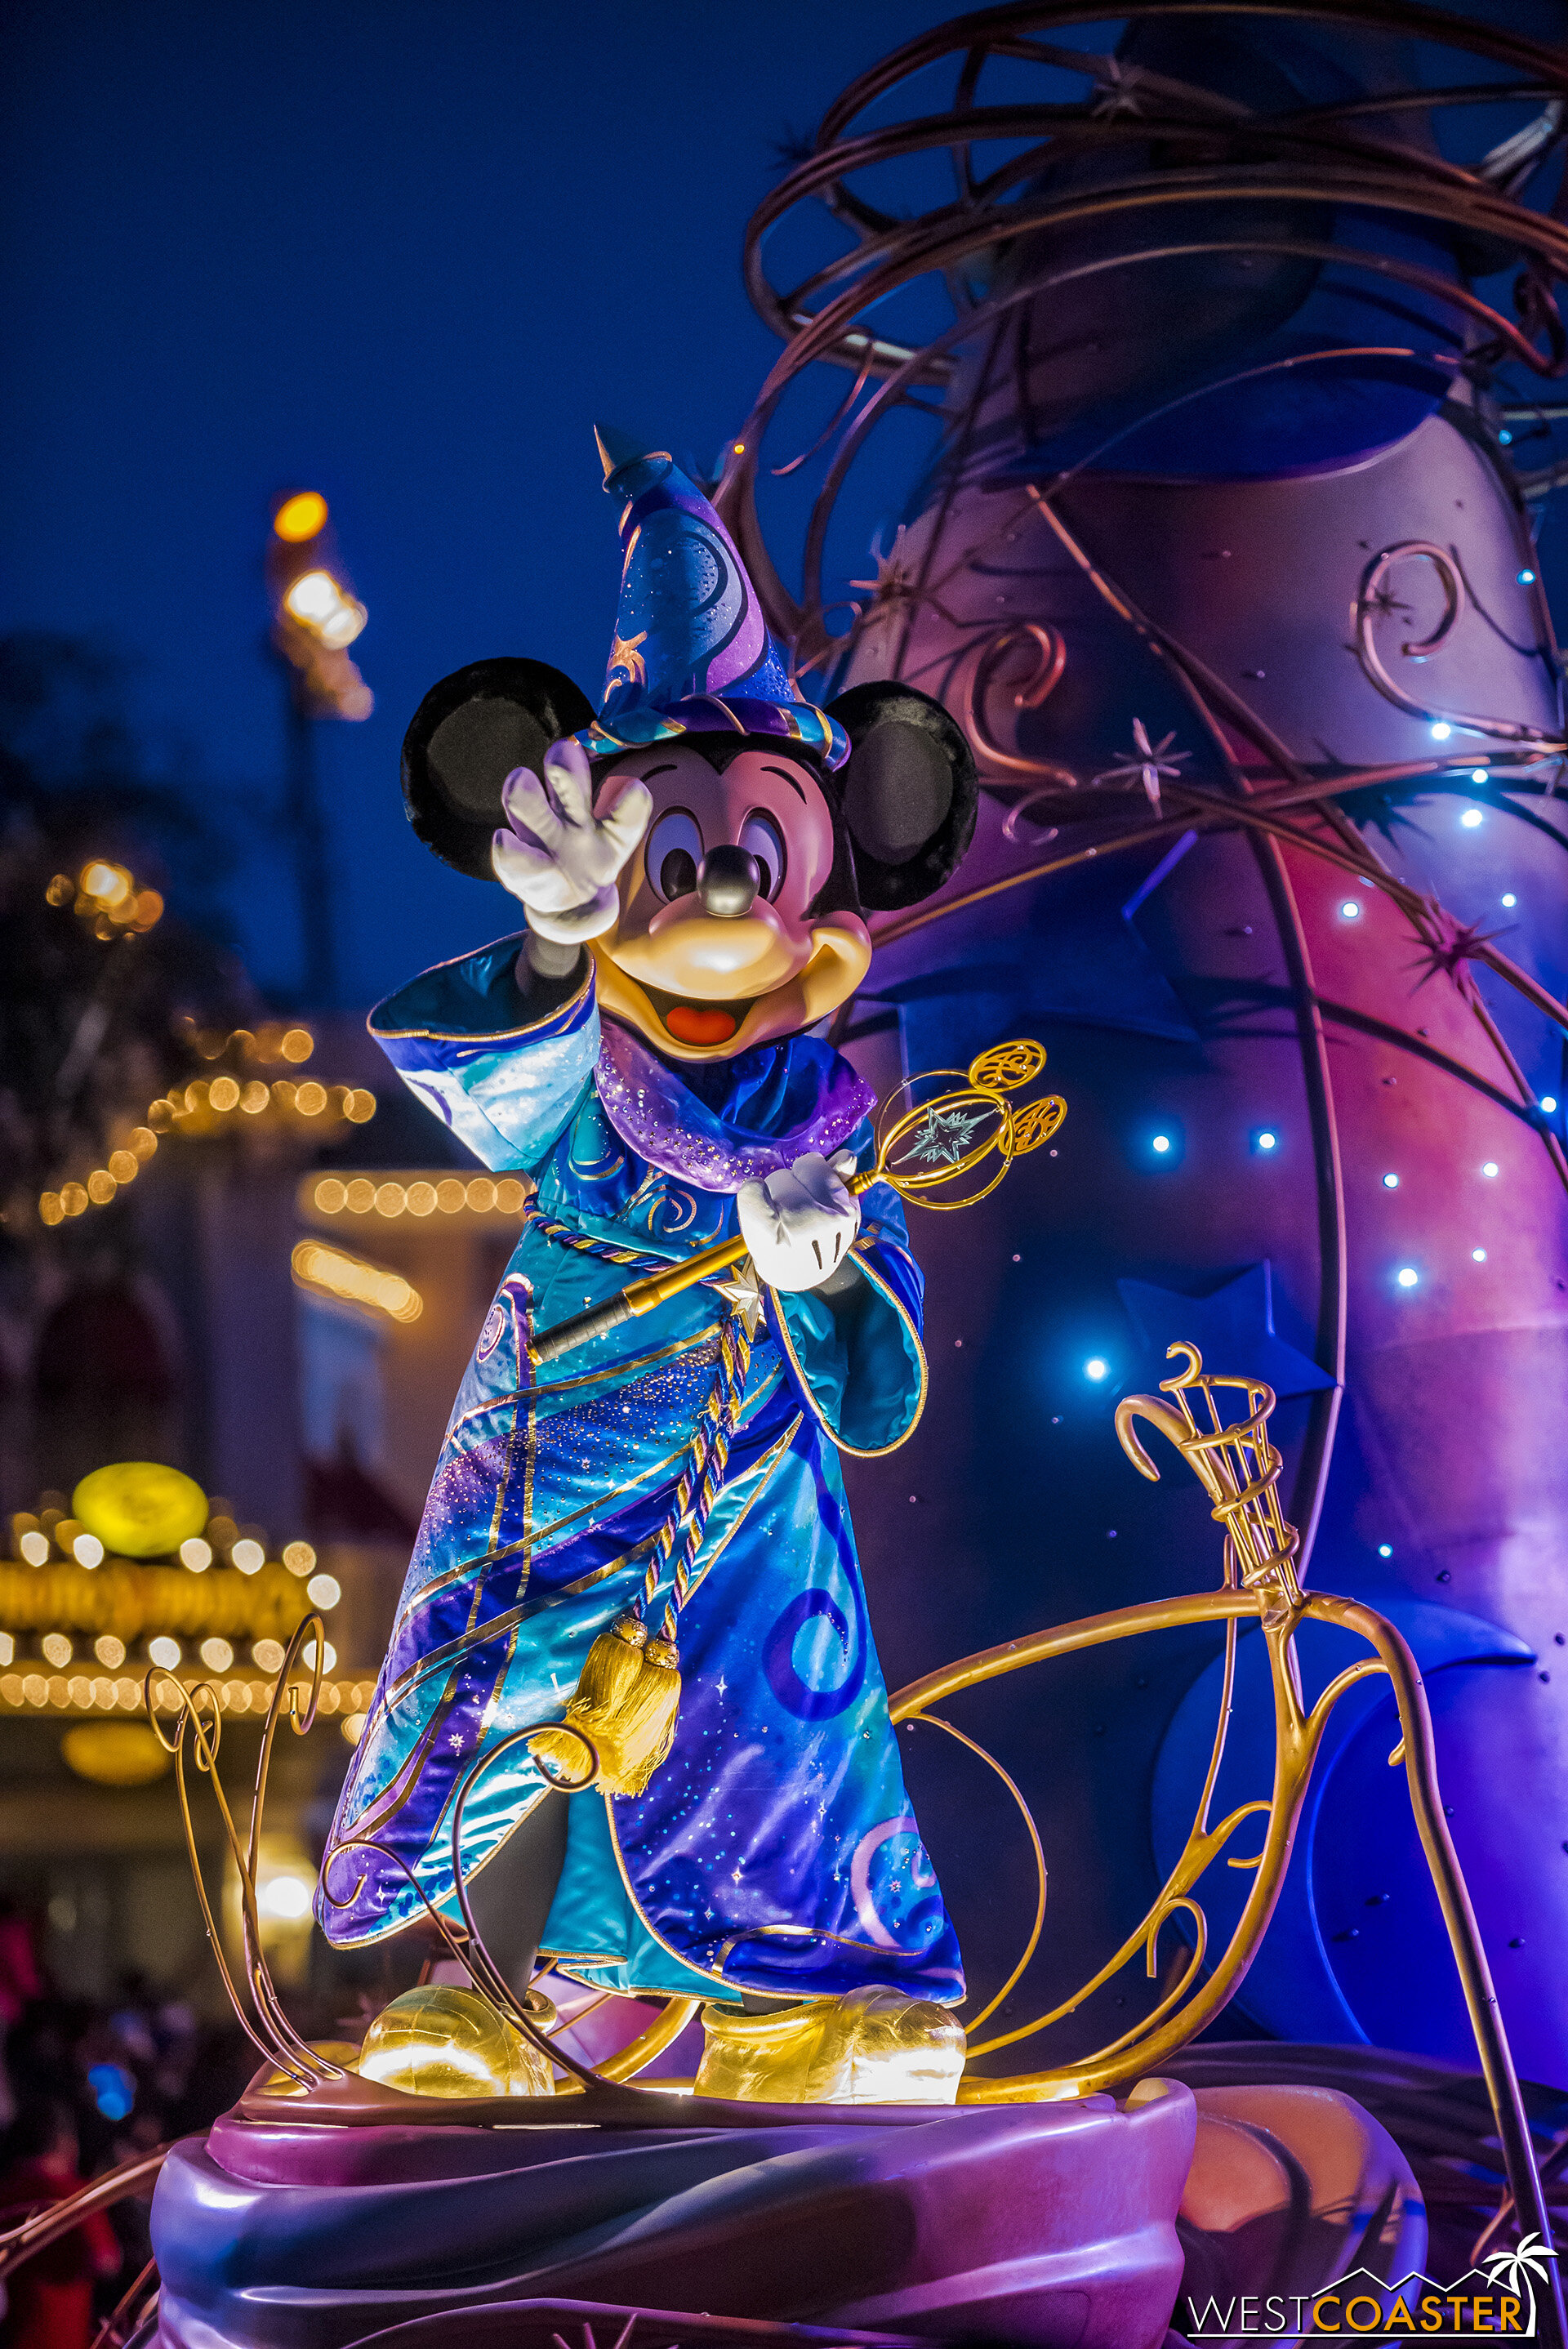  Mickey Mouse greets the evening guests on his float, which literally sparkles! 